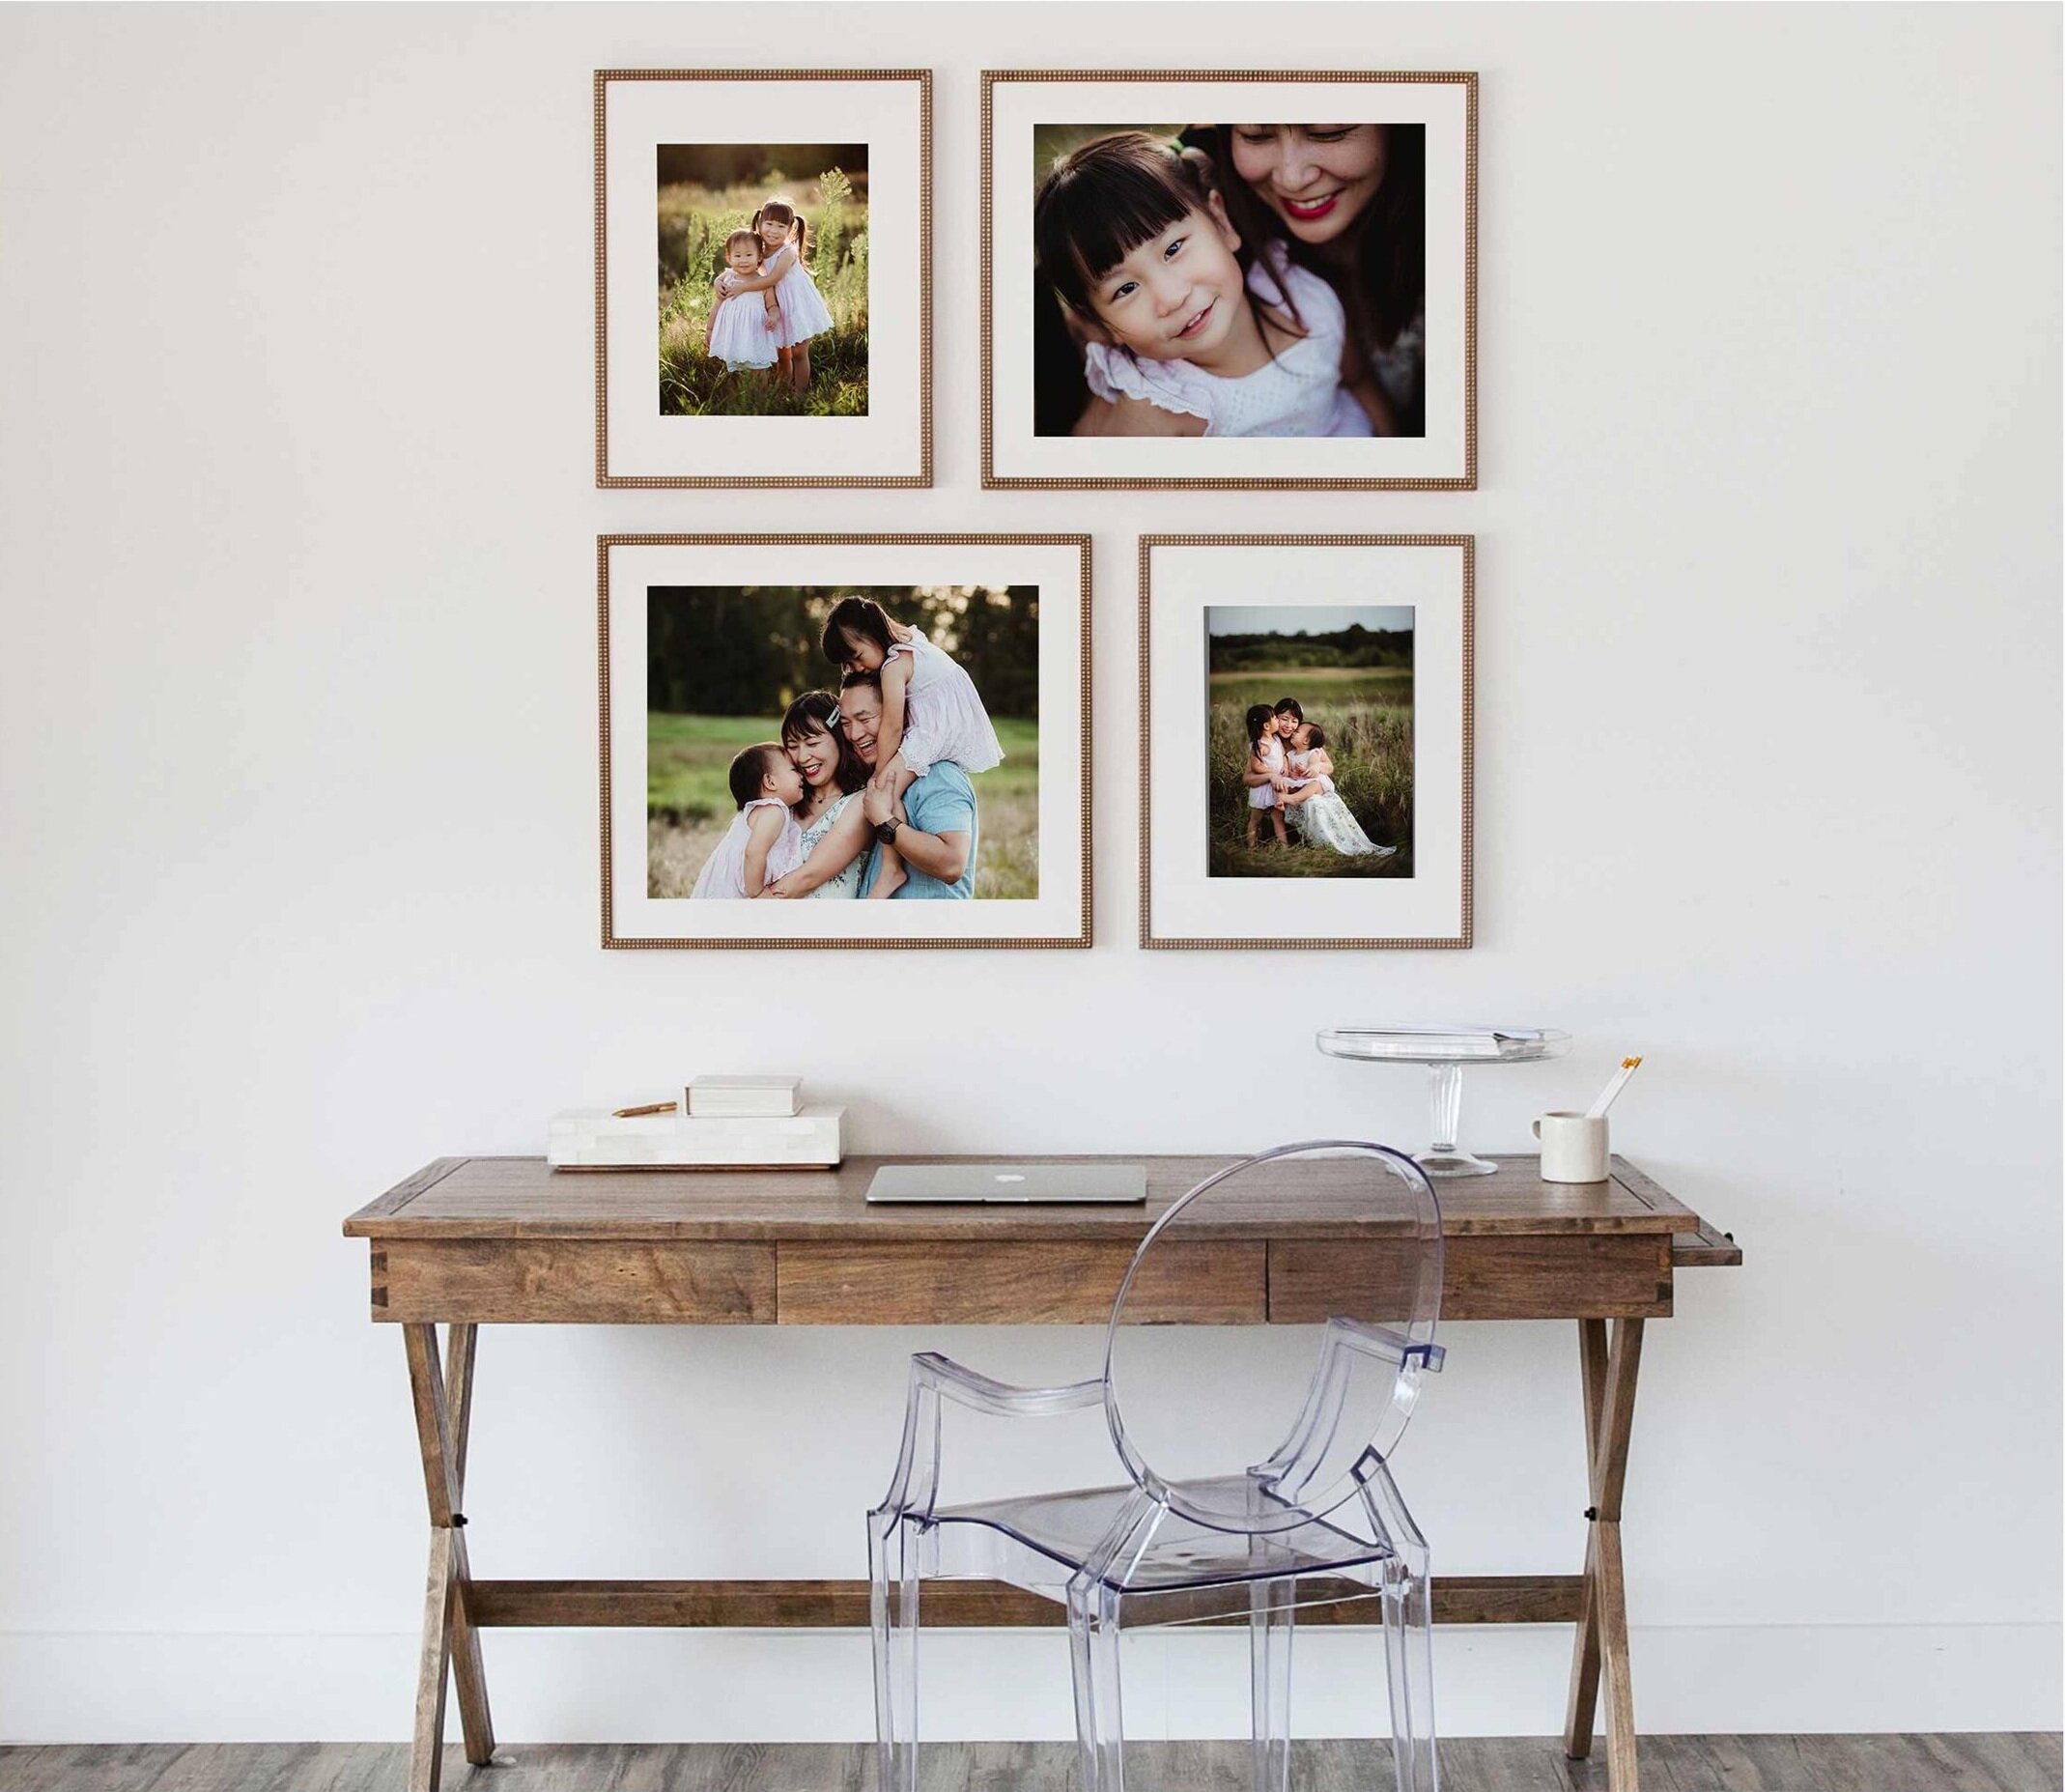 Another gorgeous family session in West Lafayette, Indiana displayed in large archival prints over a desk